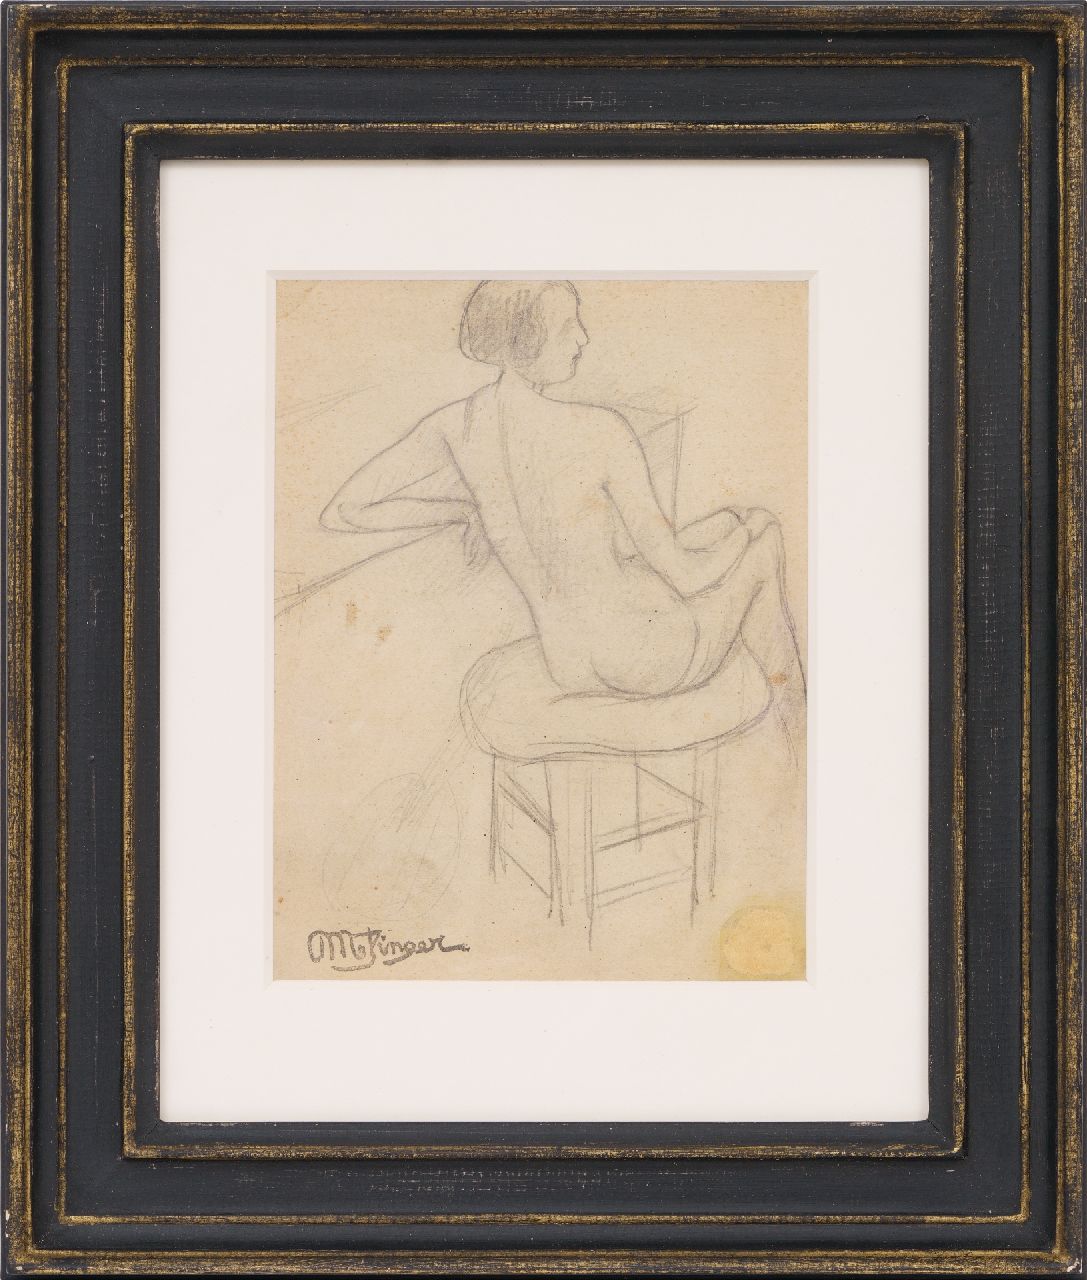 Metzinger J.D.A.  | 'Jean' Dominique Antony Metzinger, Etude d'une femme nue assise; on the reverse: Guitarist, pencil on paper 15.5 x 11.0 cm, signed 
l.l. and on the reverse with the artists stamp